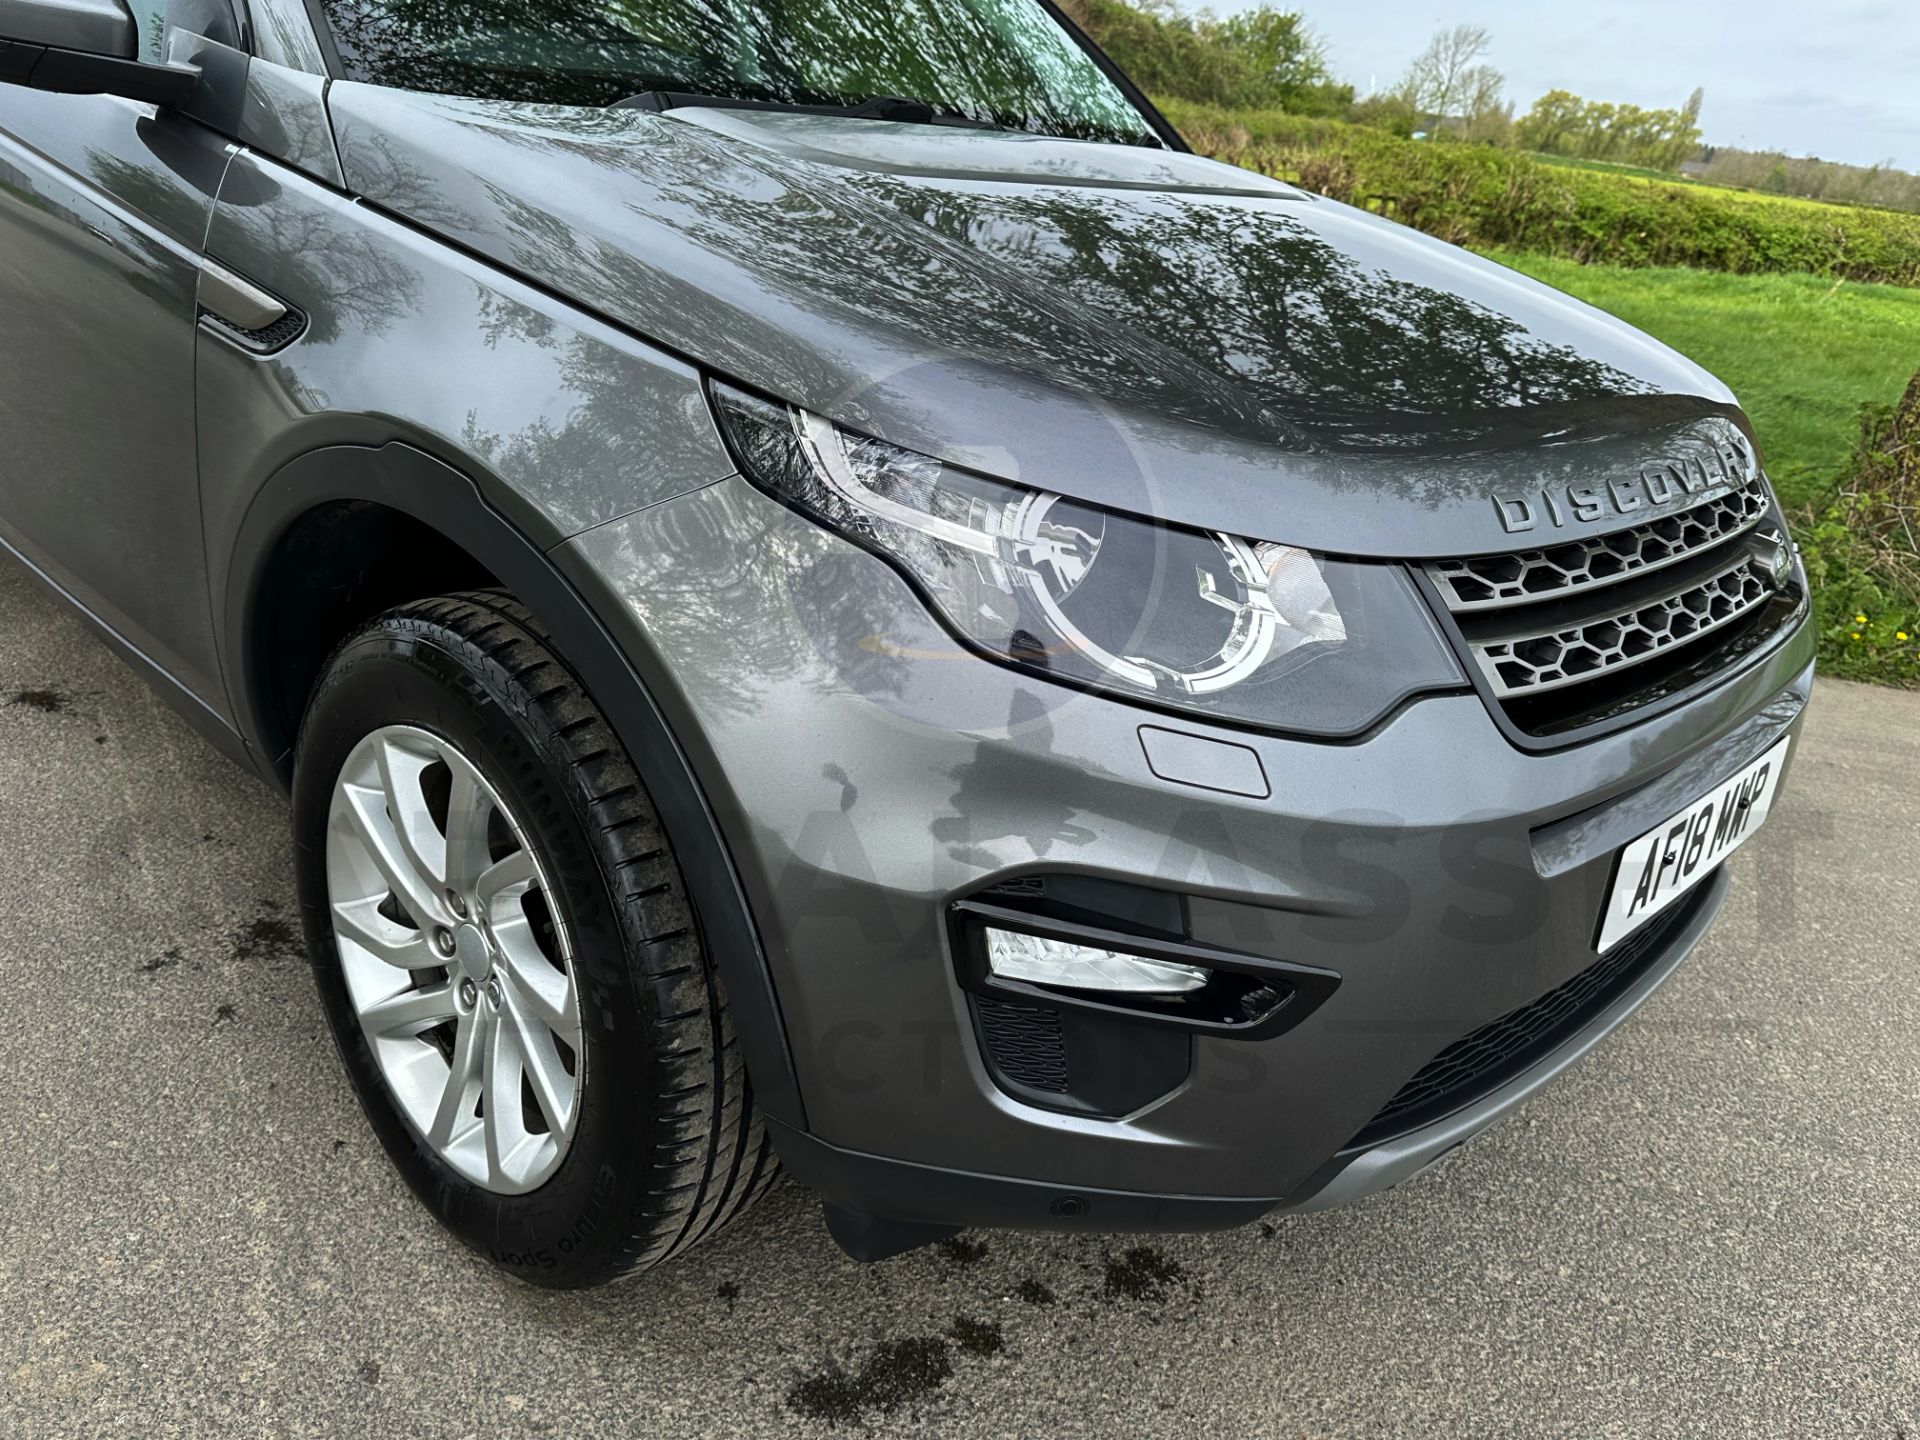 (On Sale) LAND ROVER DISCOVERY SPORT *SE TECH* 5 DOOR SUV (2018 - EURO 6) 2.0 TD4 - AUTO *HUGE SPEC* - Image 15 of 51